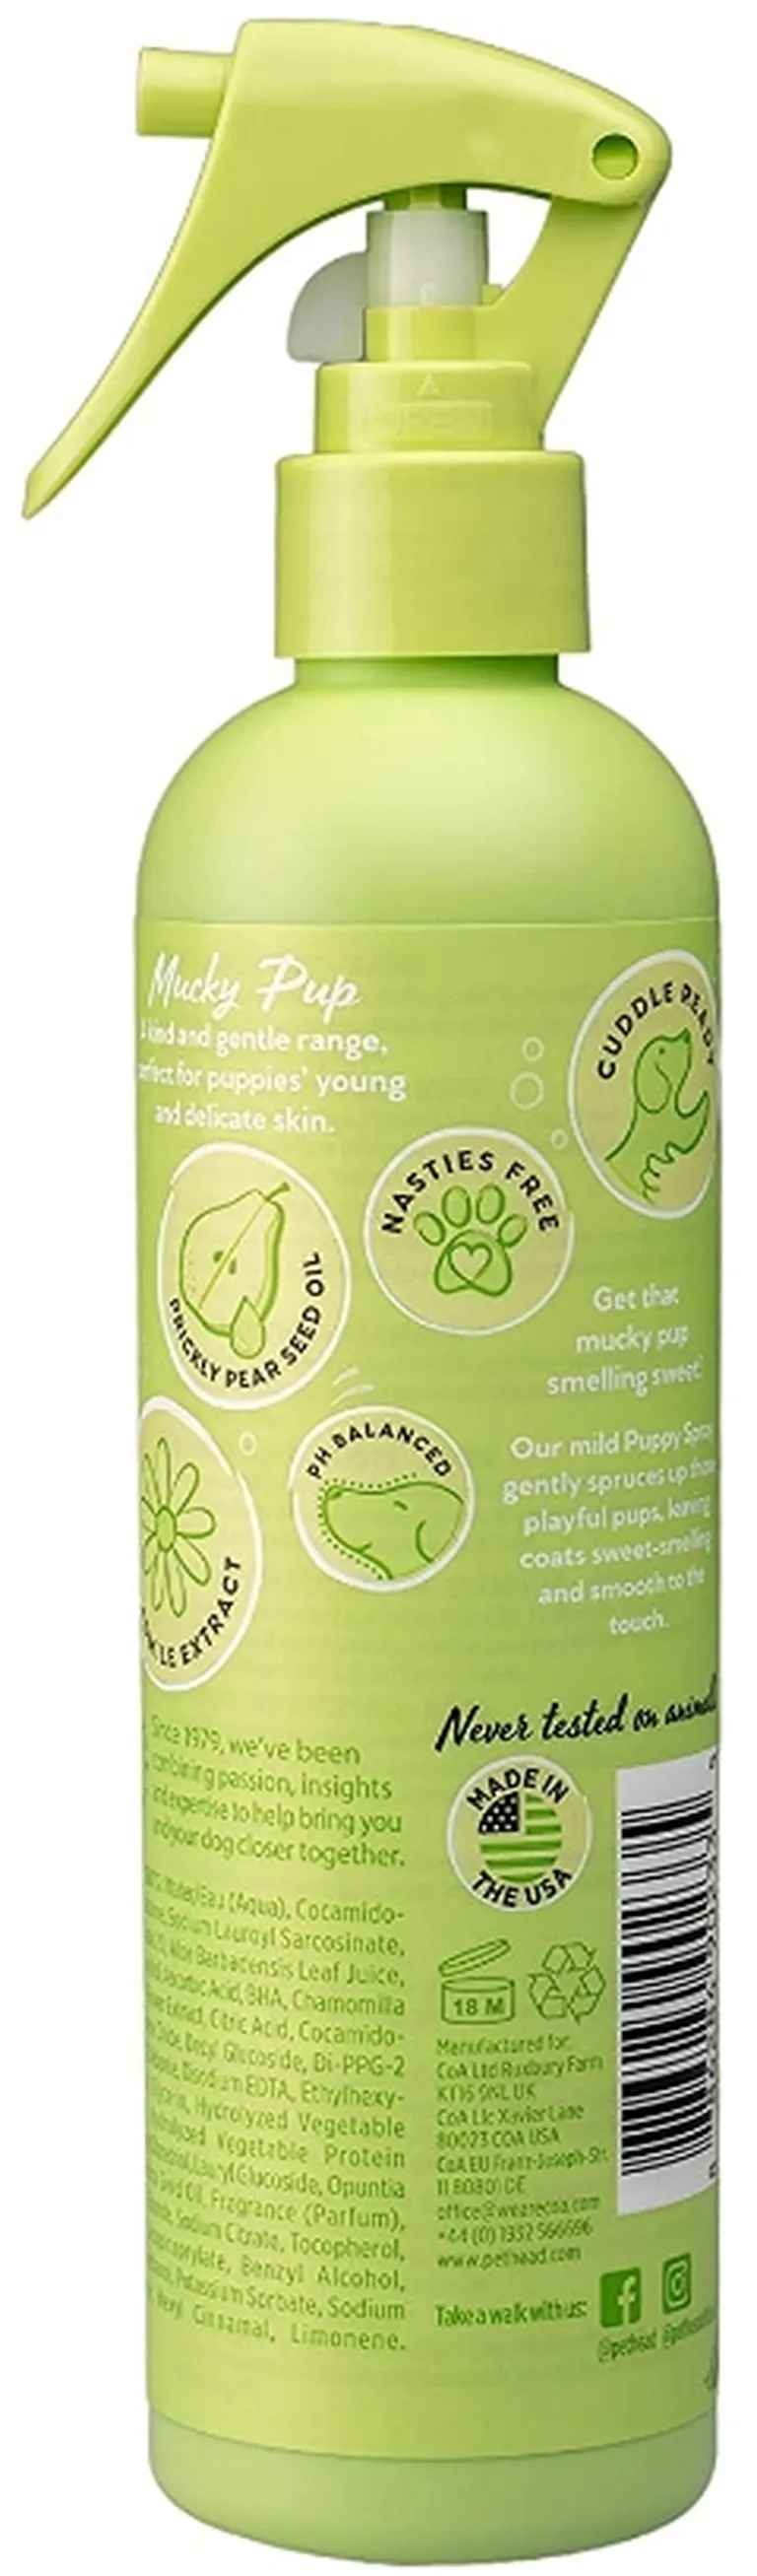 Pet Head Mucky Pup Puppy Spray Pear with Chamomile Photo 2